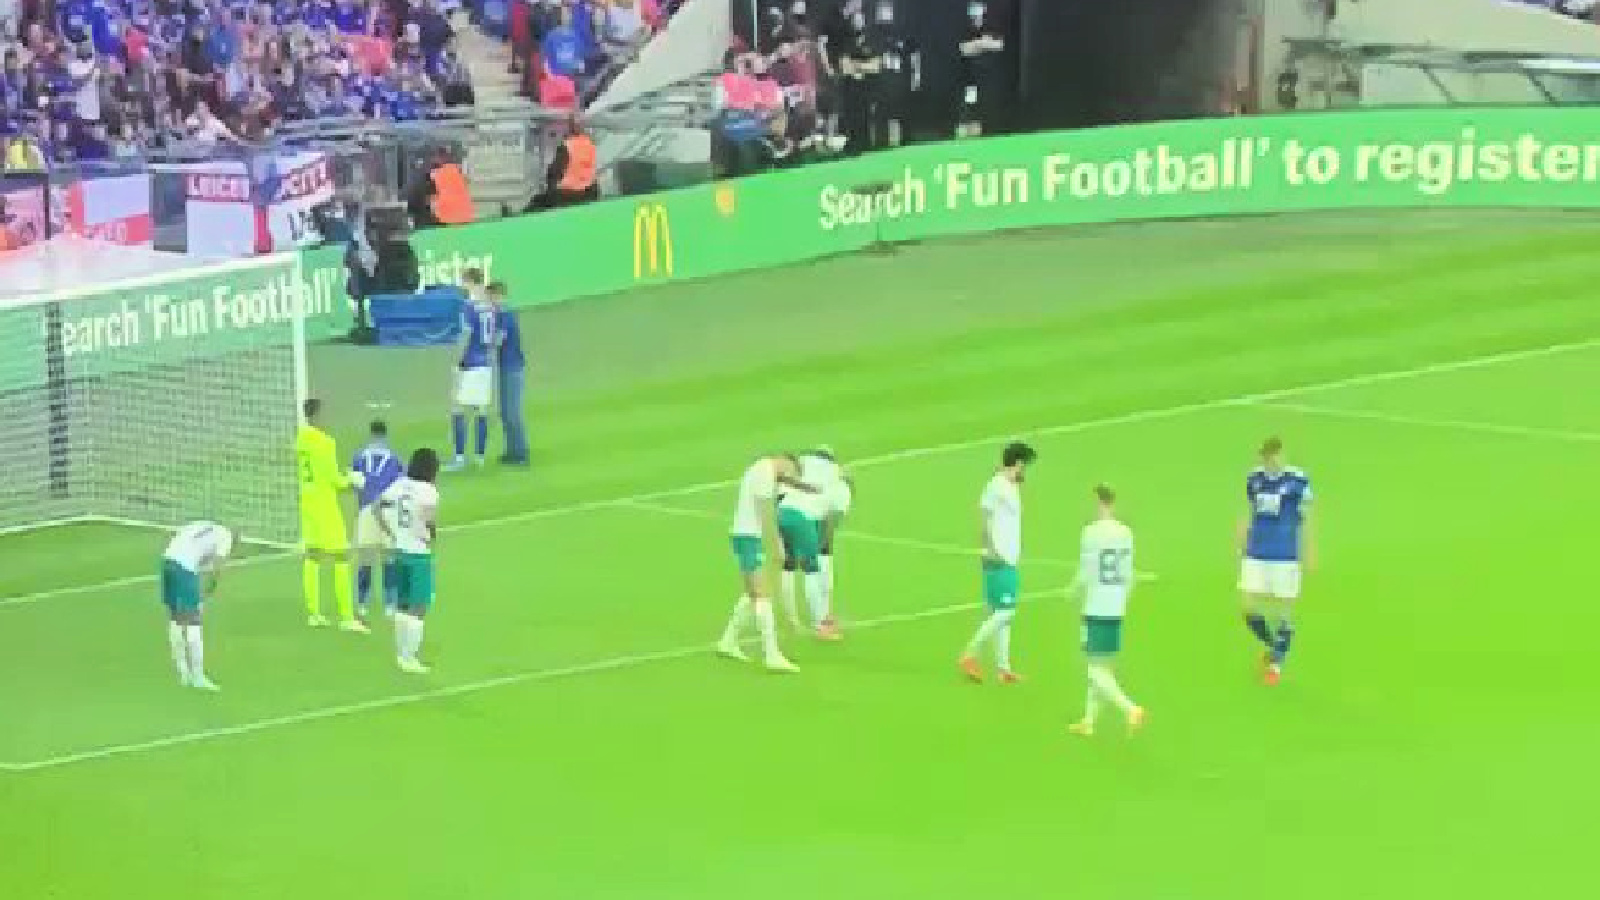 Leicester City fan invades pitch to get a selfie with James Maddison